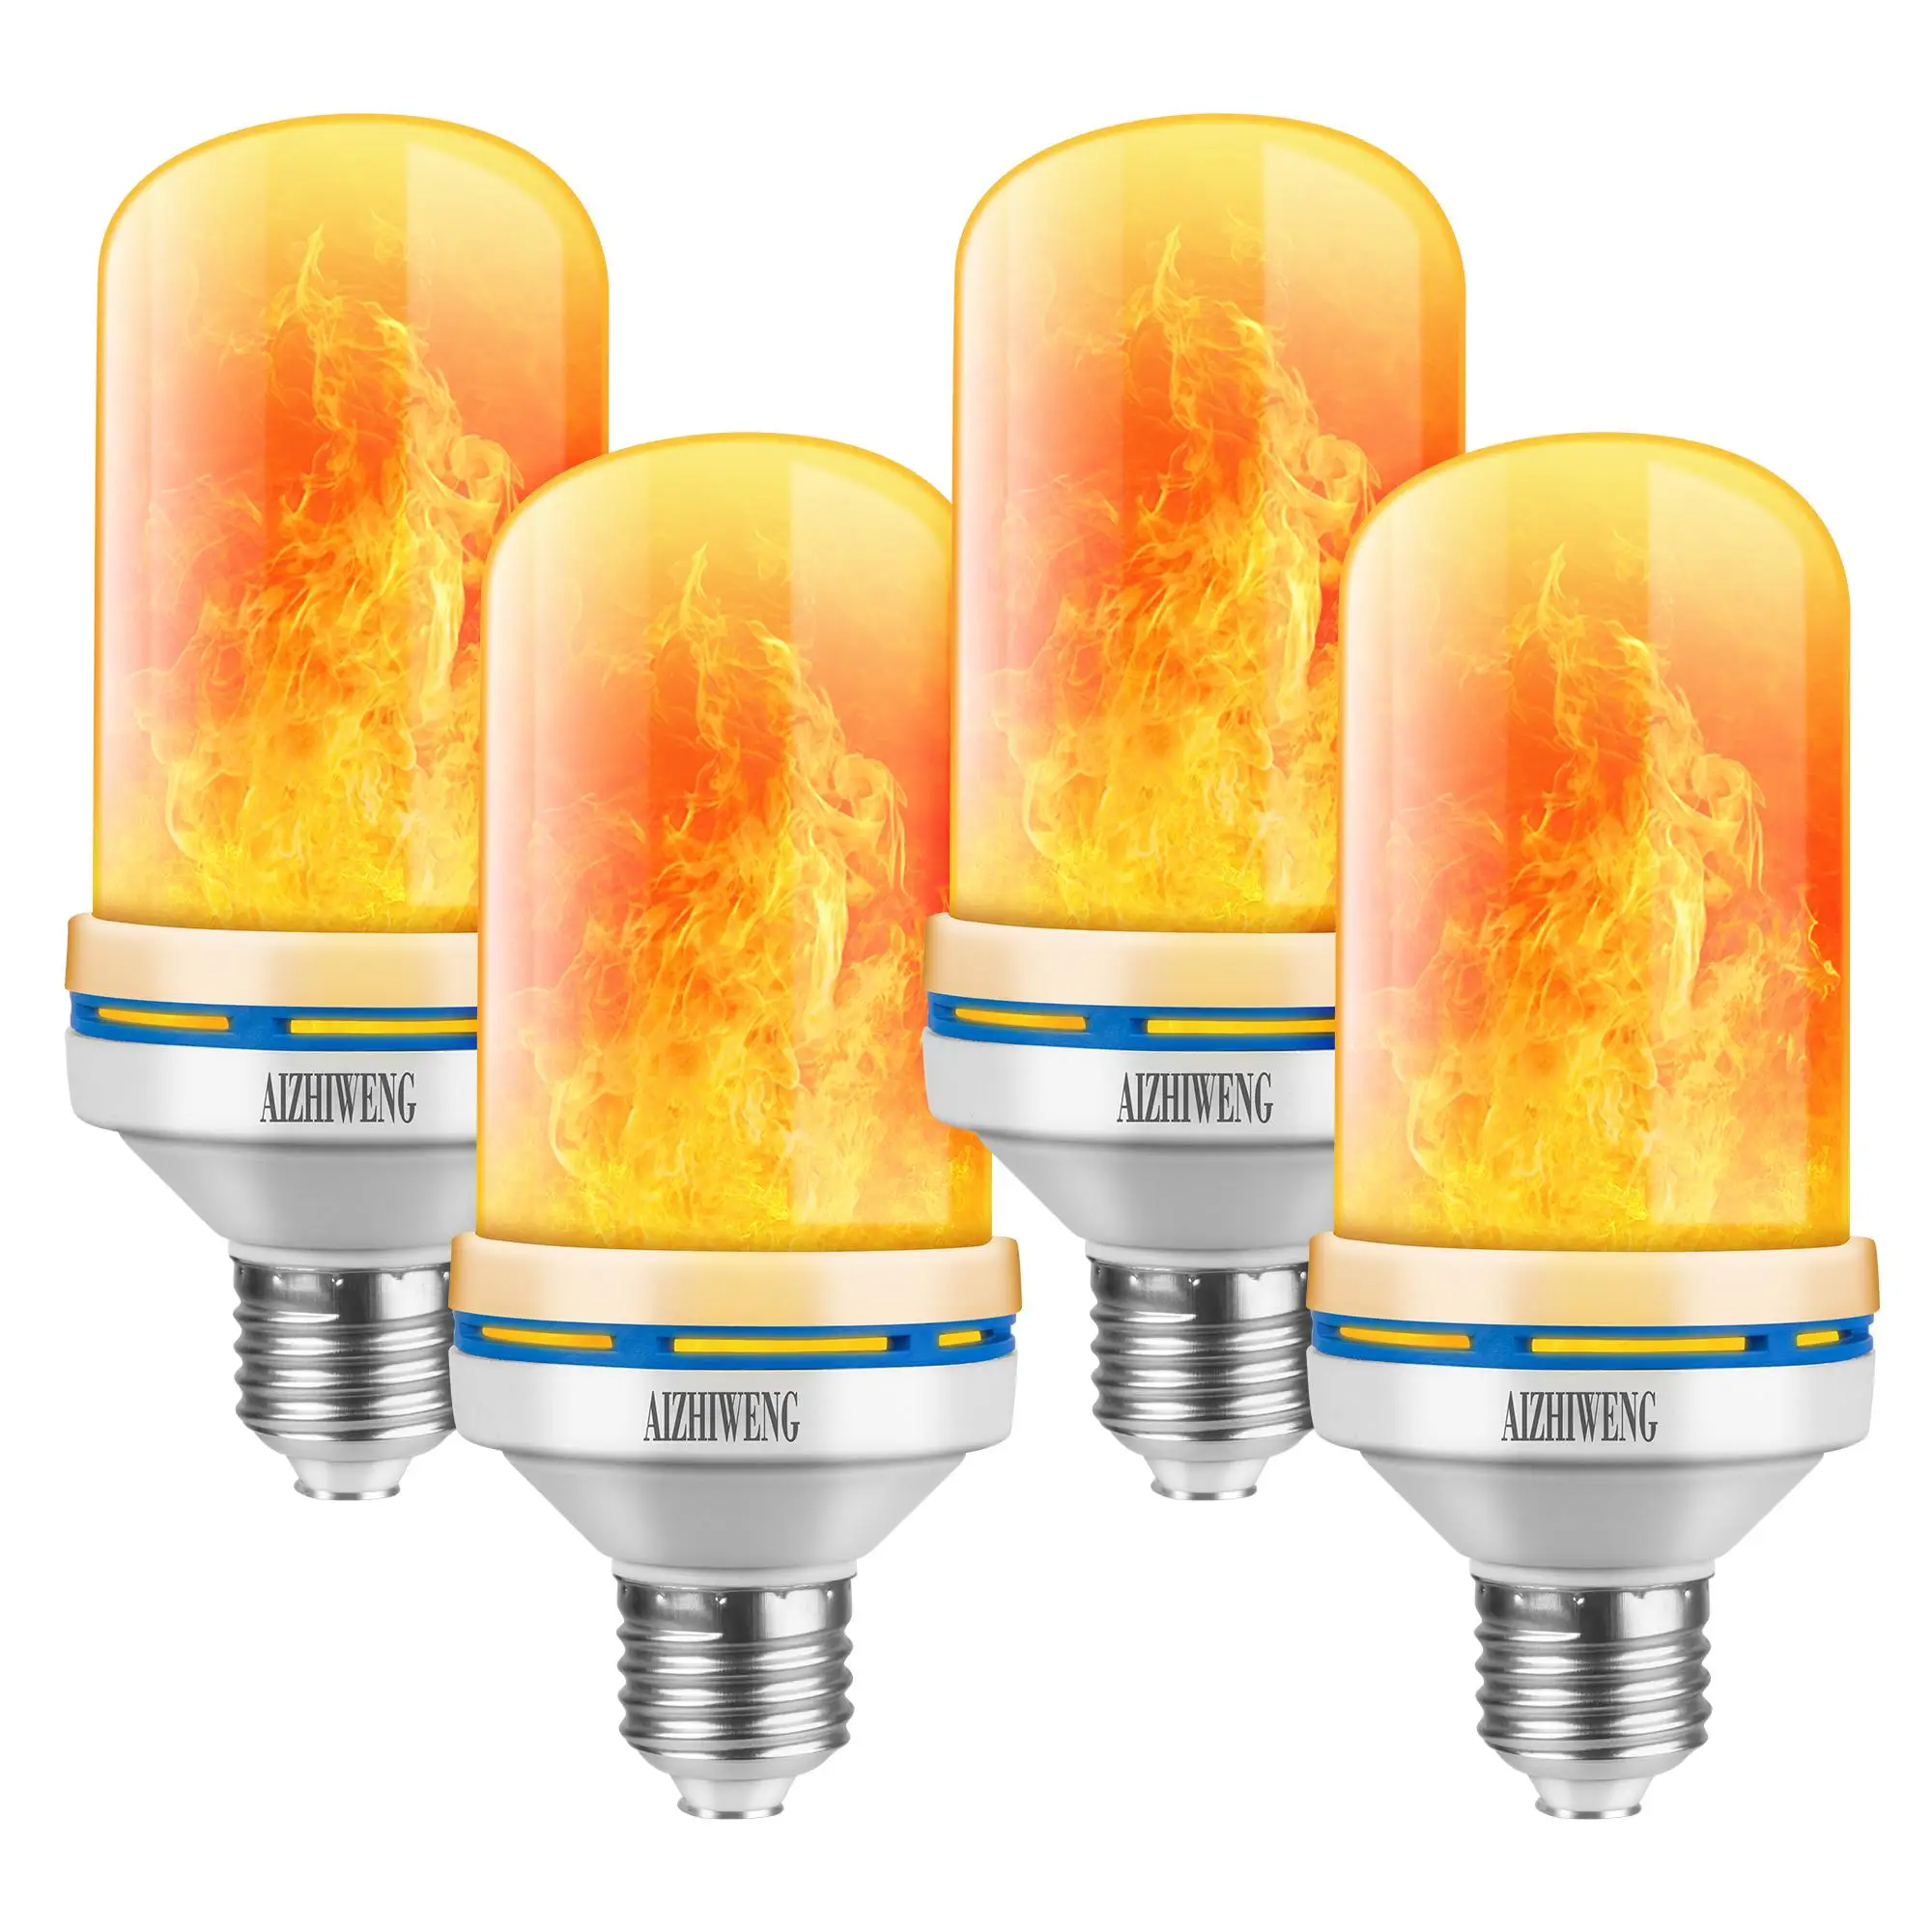 

Flame Light Bulb (4 Pack) | LED Flame Effect Light Bulbs with Upside Inverted Realistic Flickering Faux Flames | 5 Watt 150 Lume